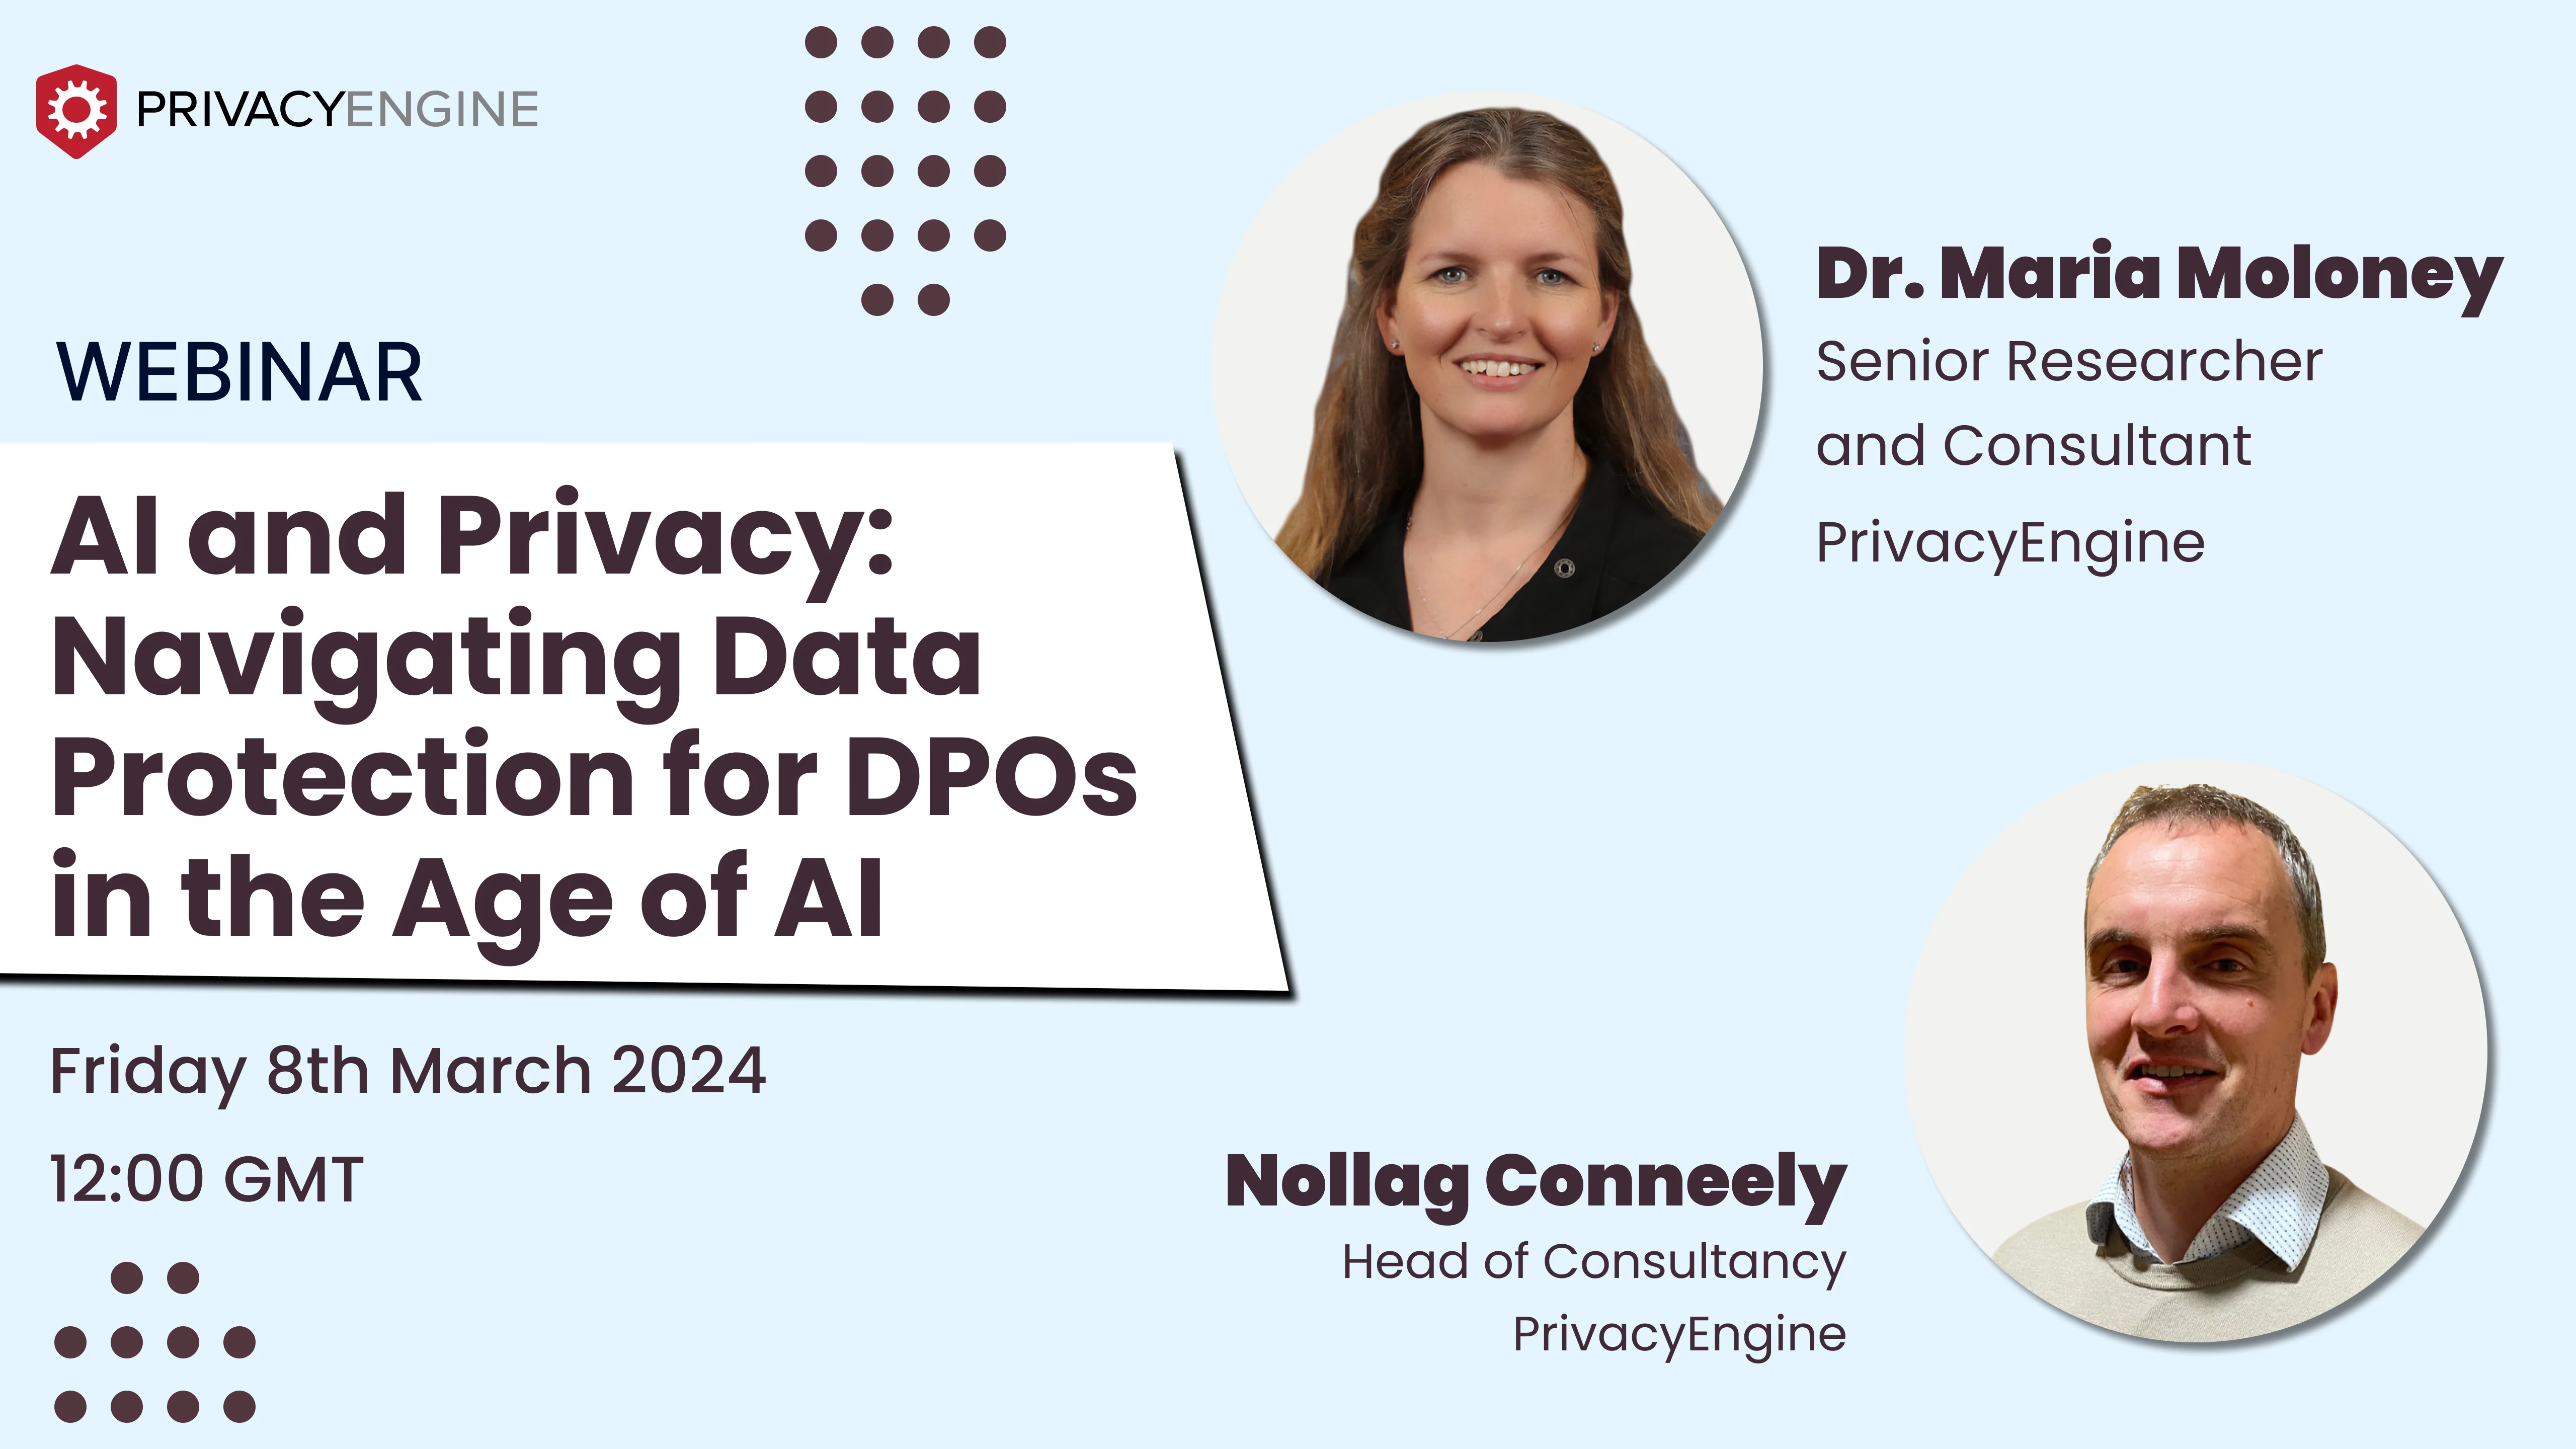 AI and Privacy: Navigating Data Protection for DPOs in the Age of AI